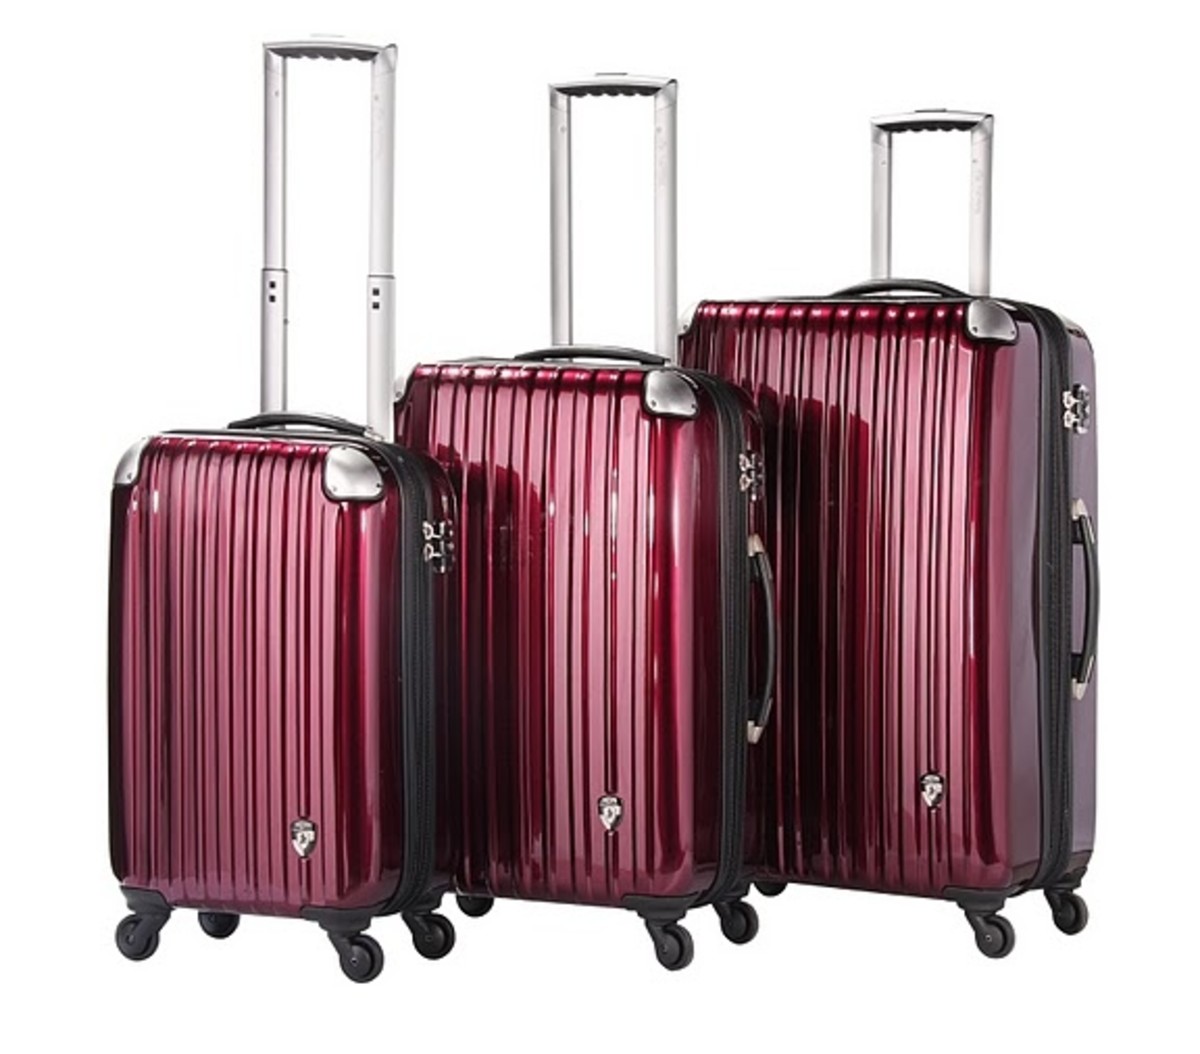 Which hardside luggage brands are the most reliable? - HubPages